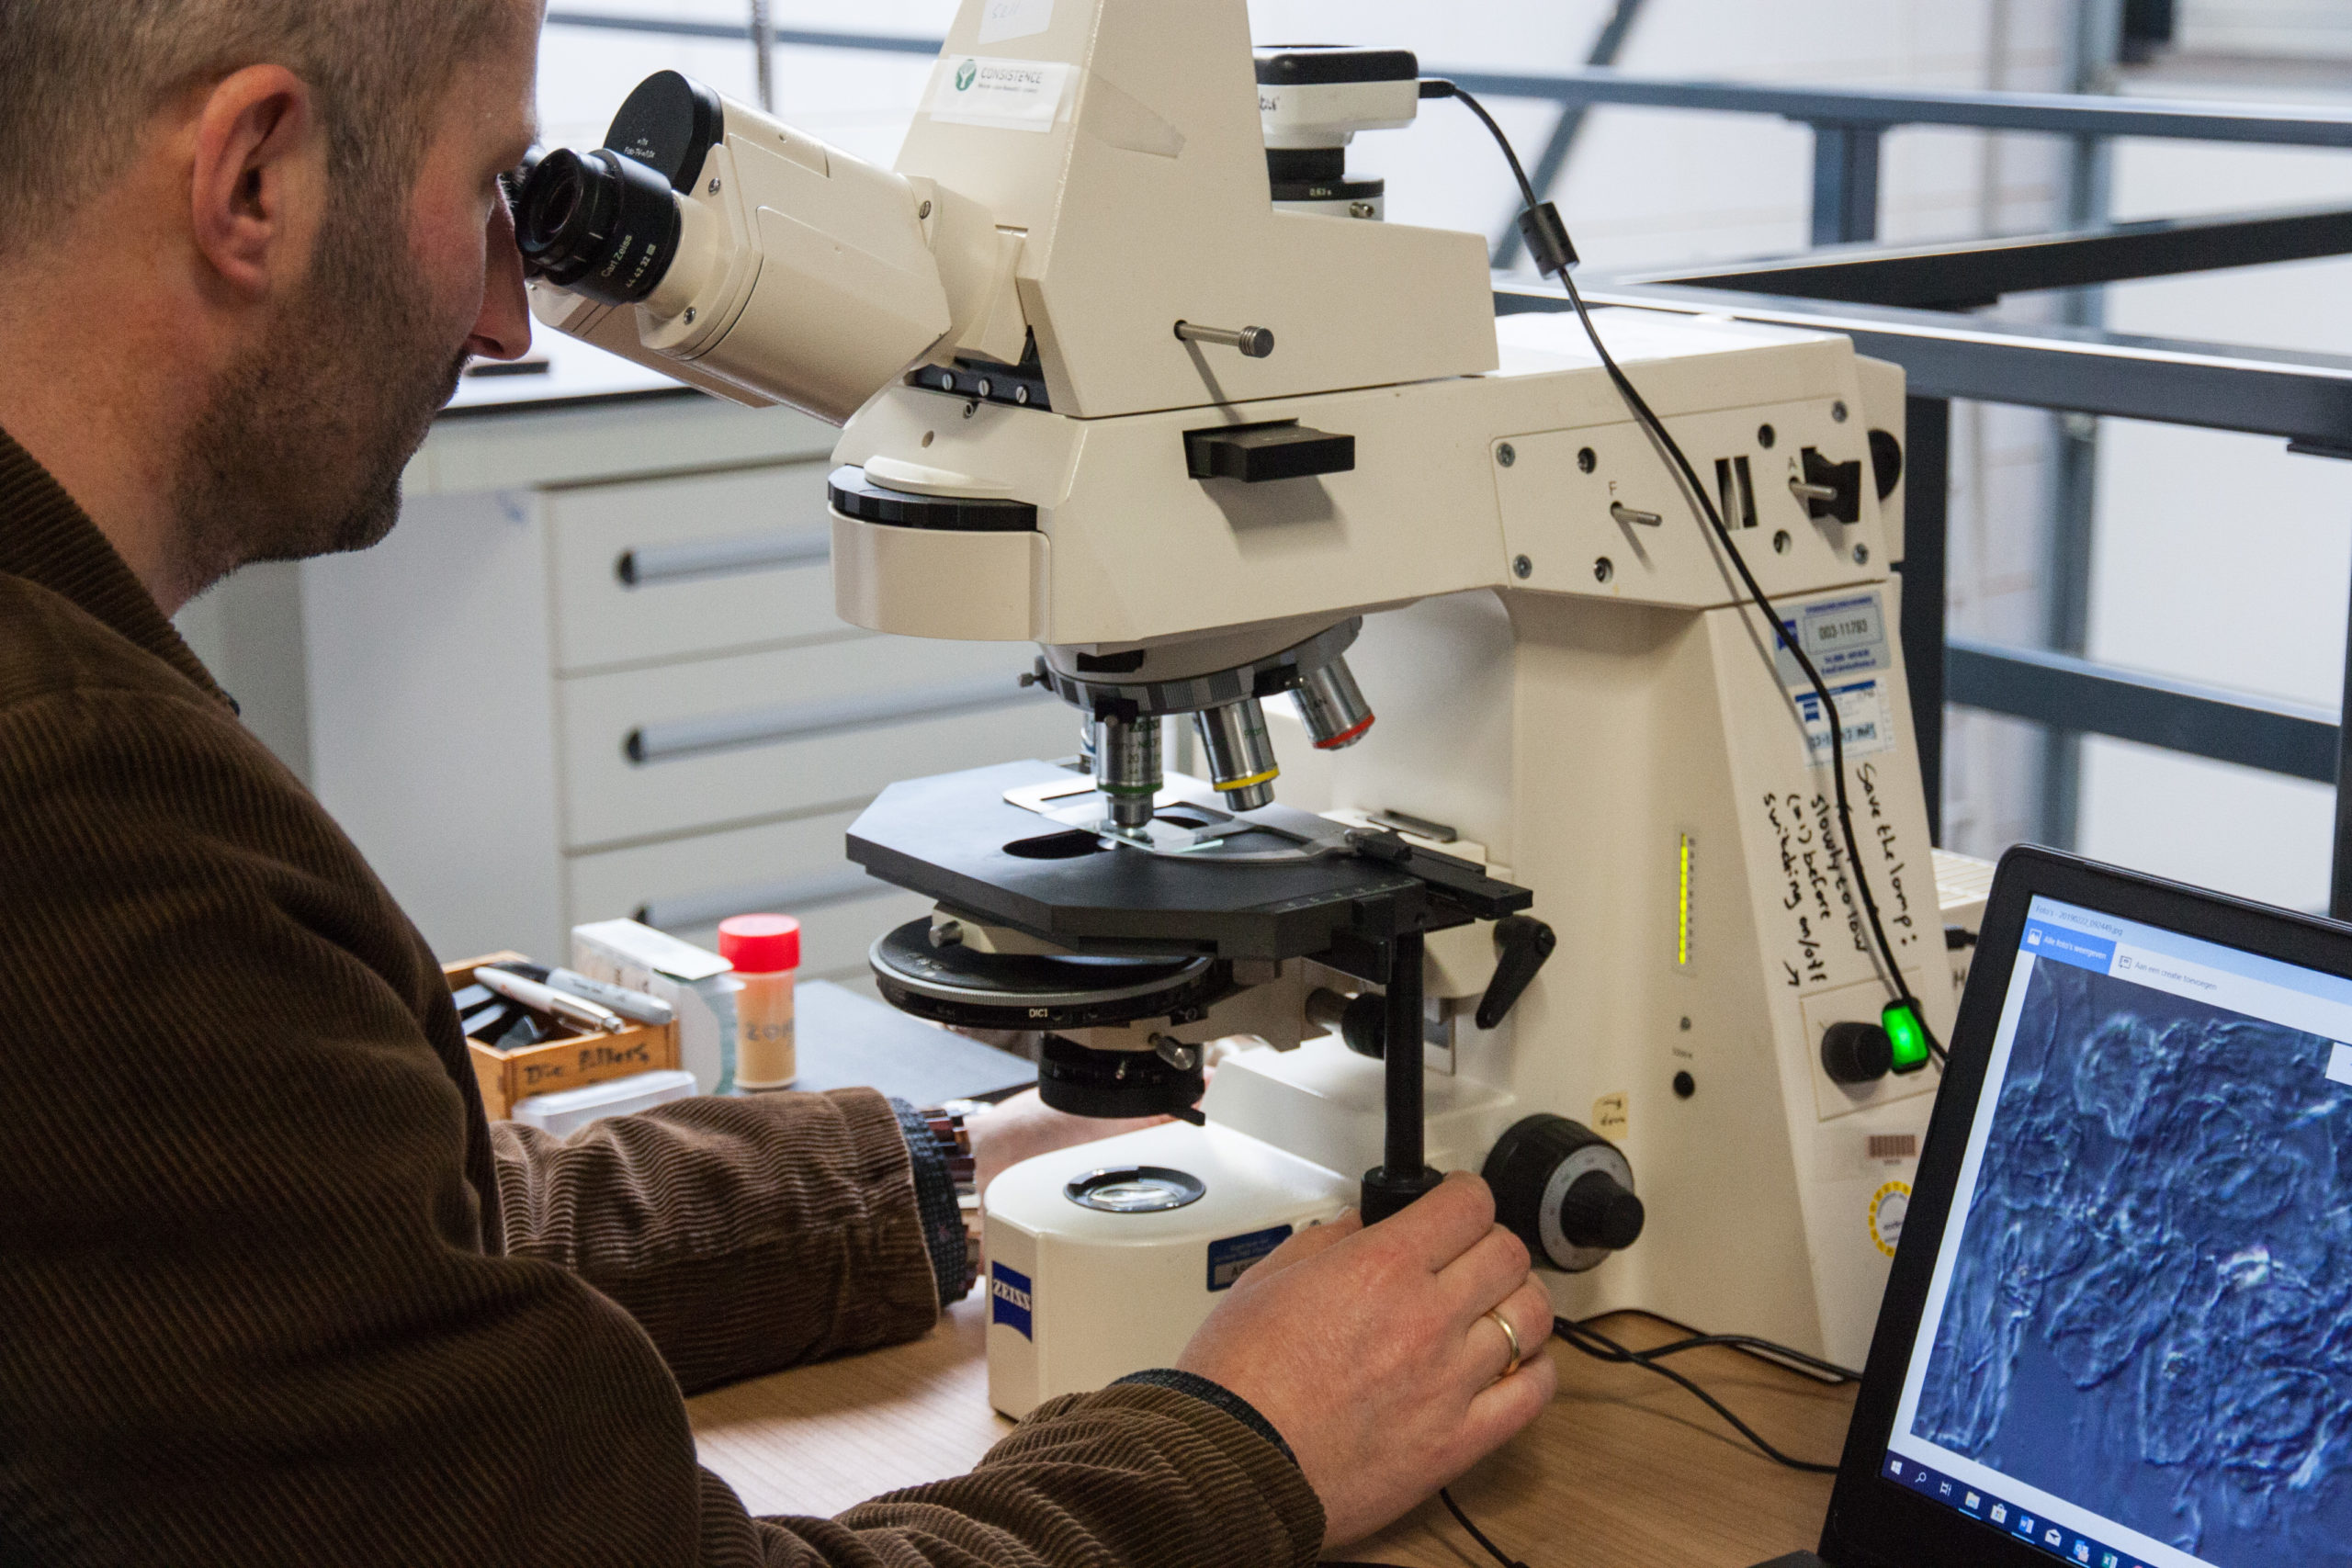 Microscopy at Consistence Microstructure Research Laboratory.